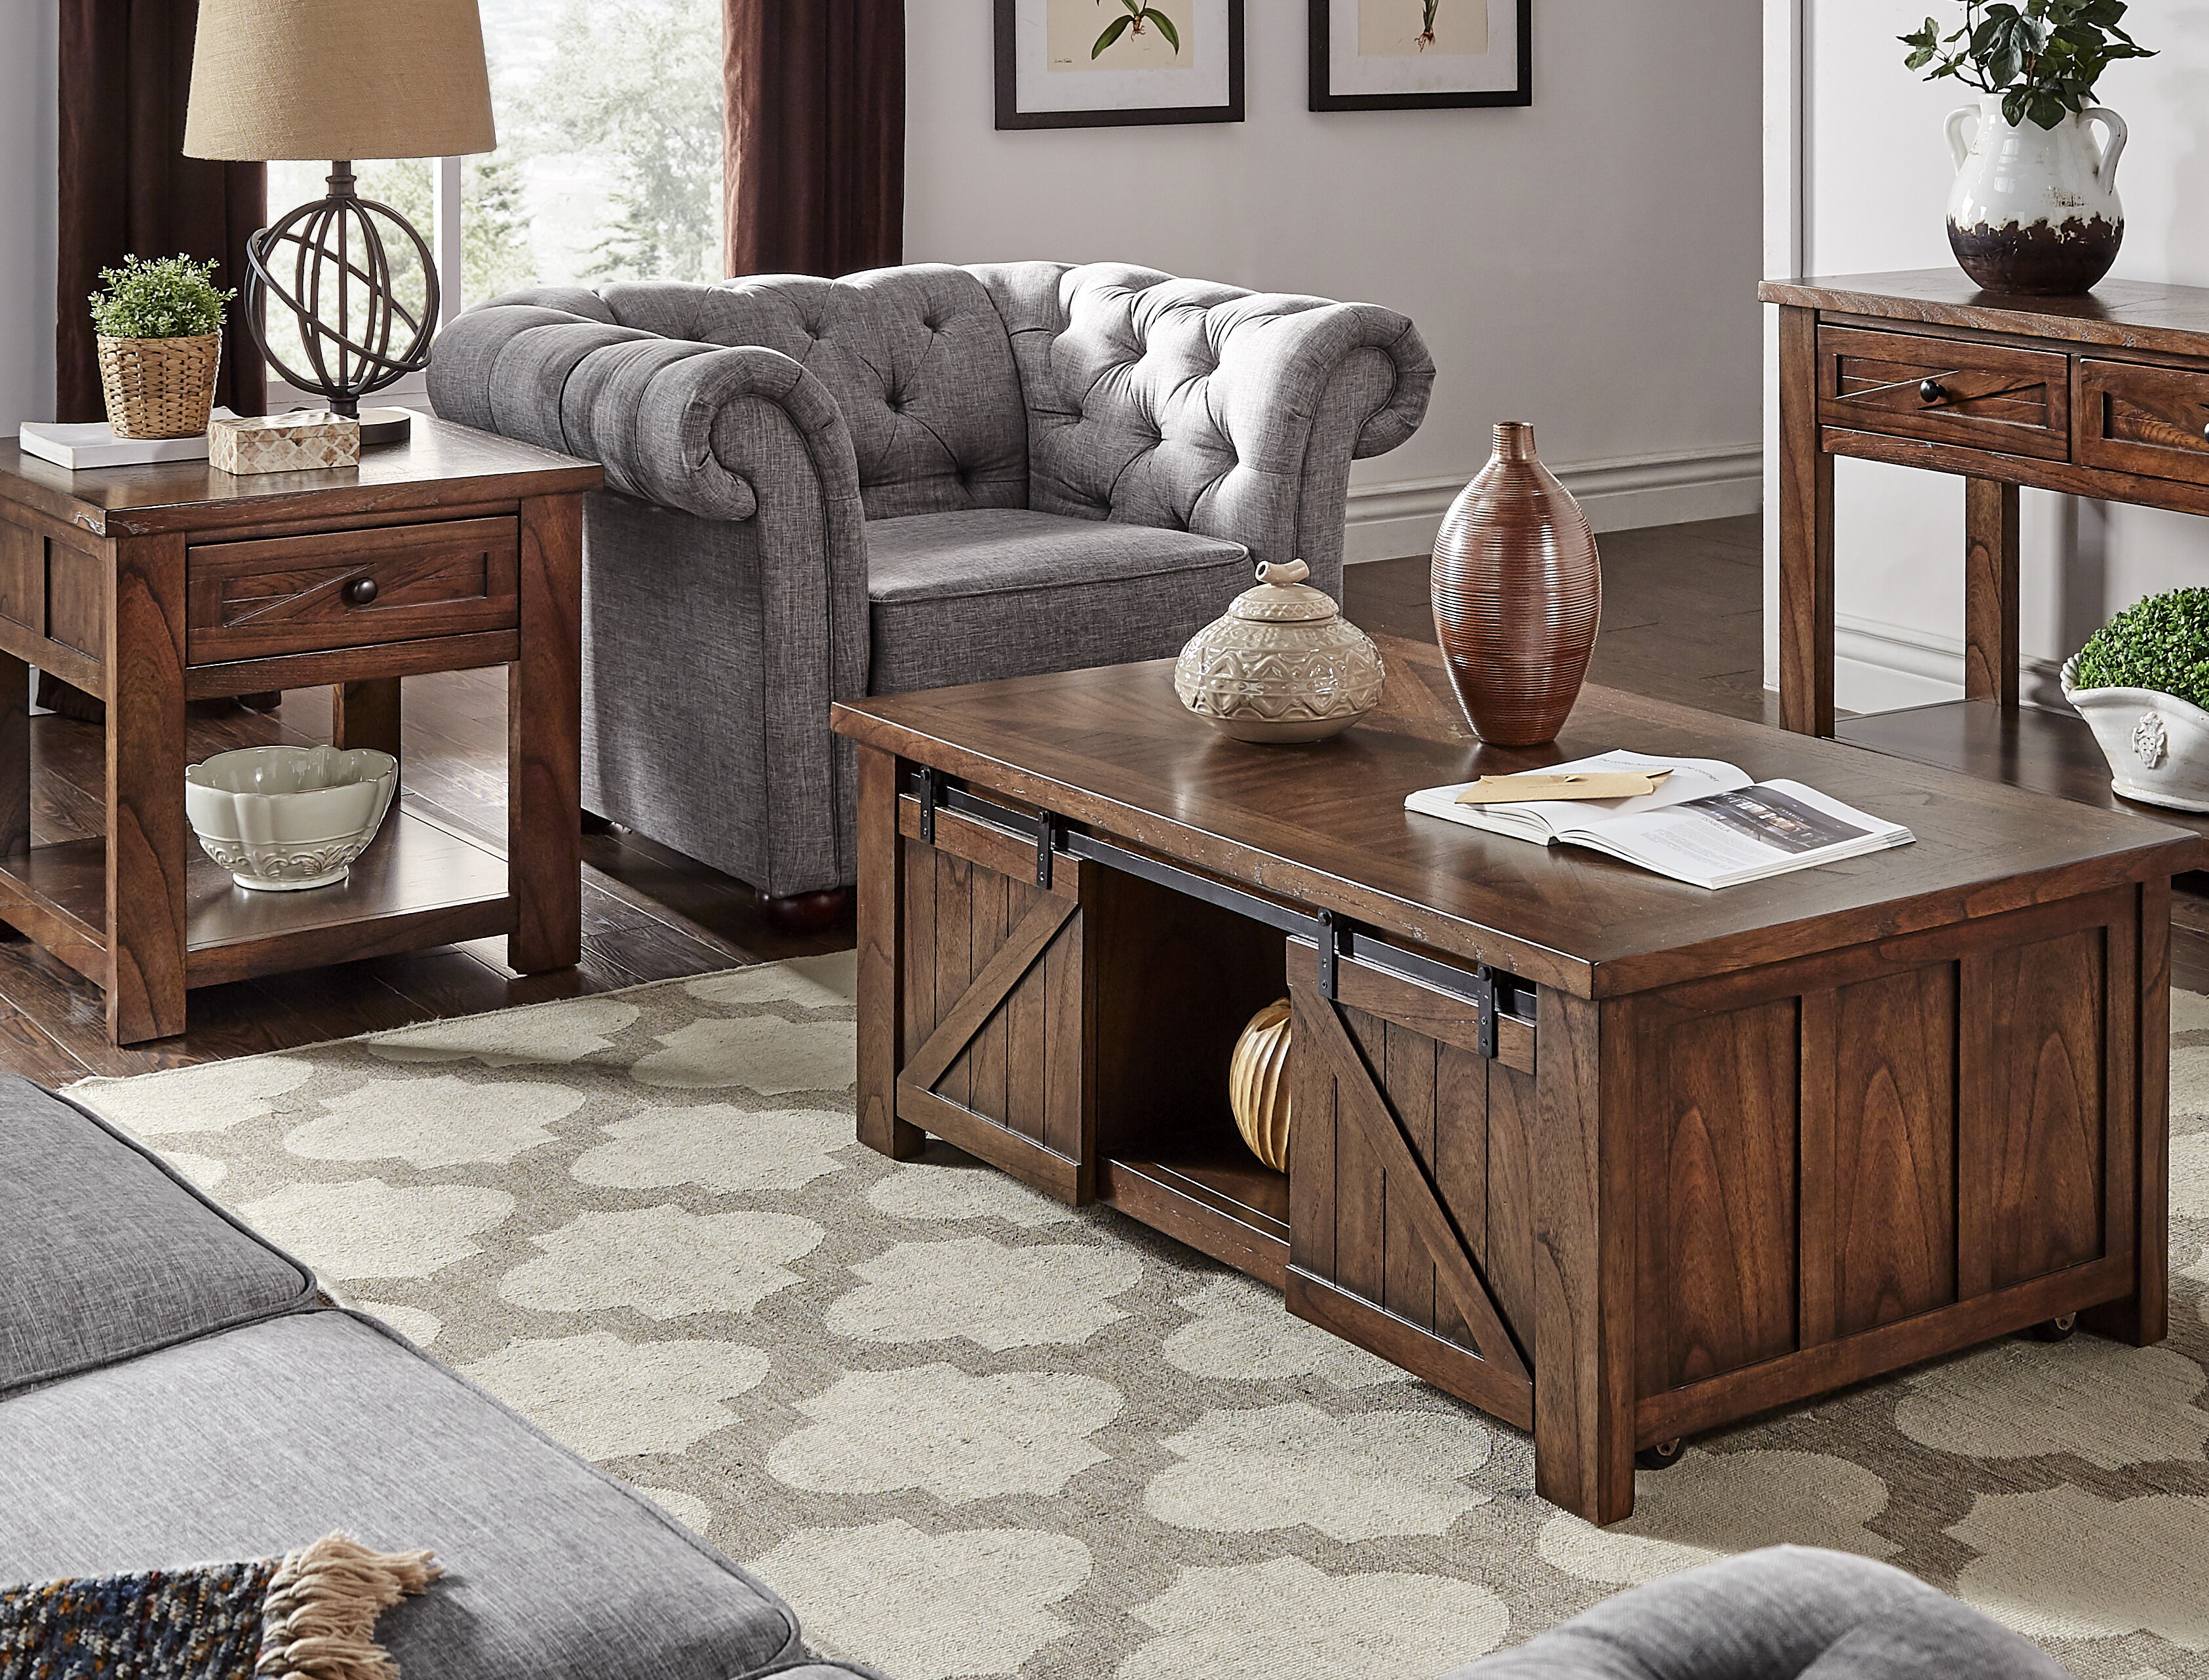 Coffee Table Door - Weston Home Burleson Brown Cherry Finish Barn Door Cocktail Table Walmart Com Walmart Com - Crafted with solid wood and reinforced steel part, this coffee table strikes a rectangular silhouette featuring a thick frame, smooth sliding barn door.